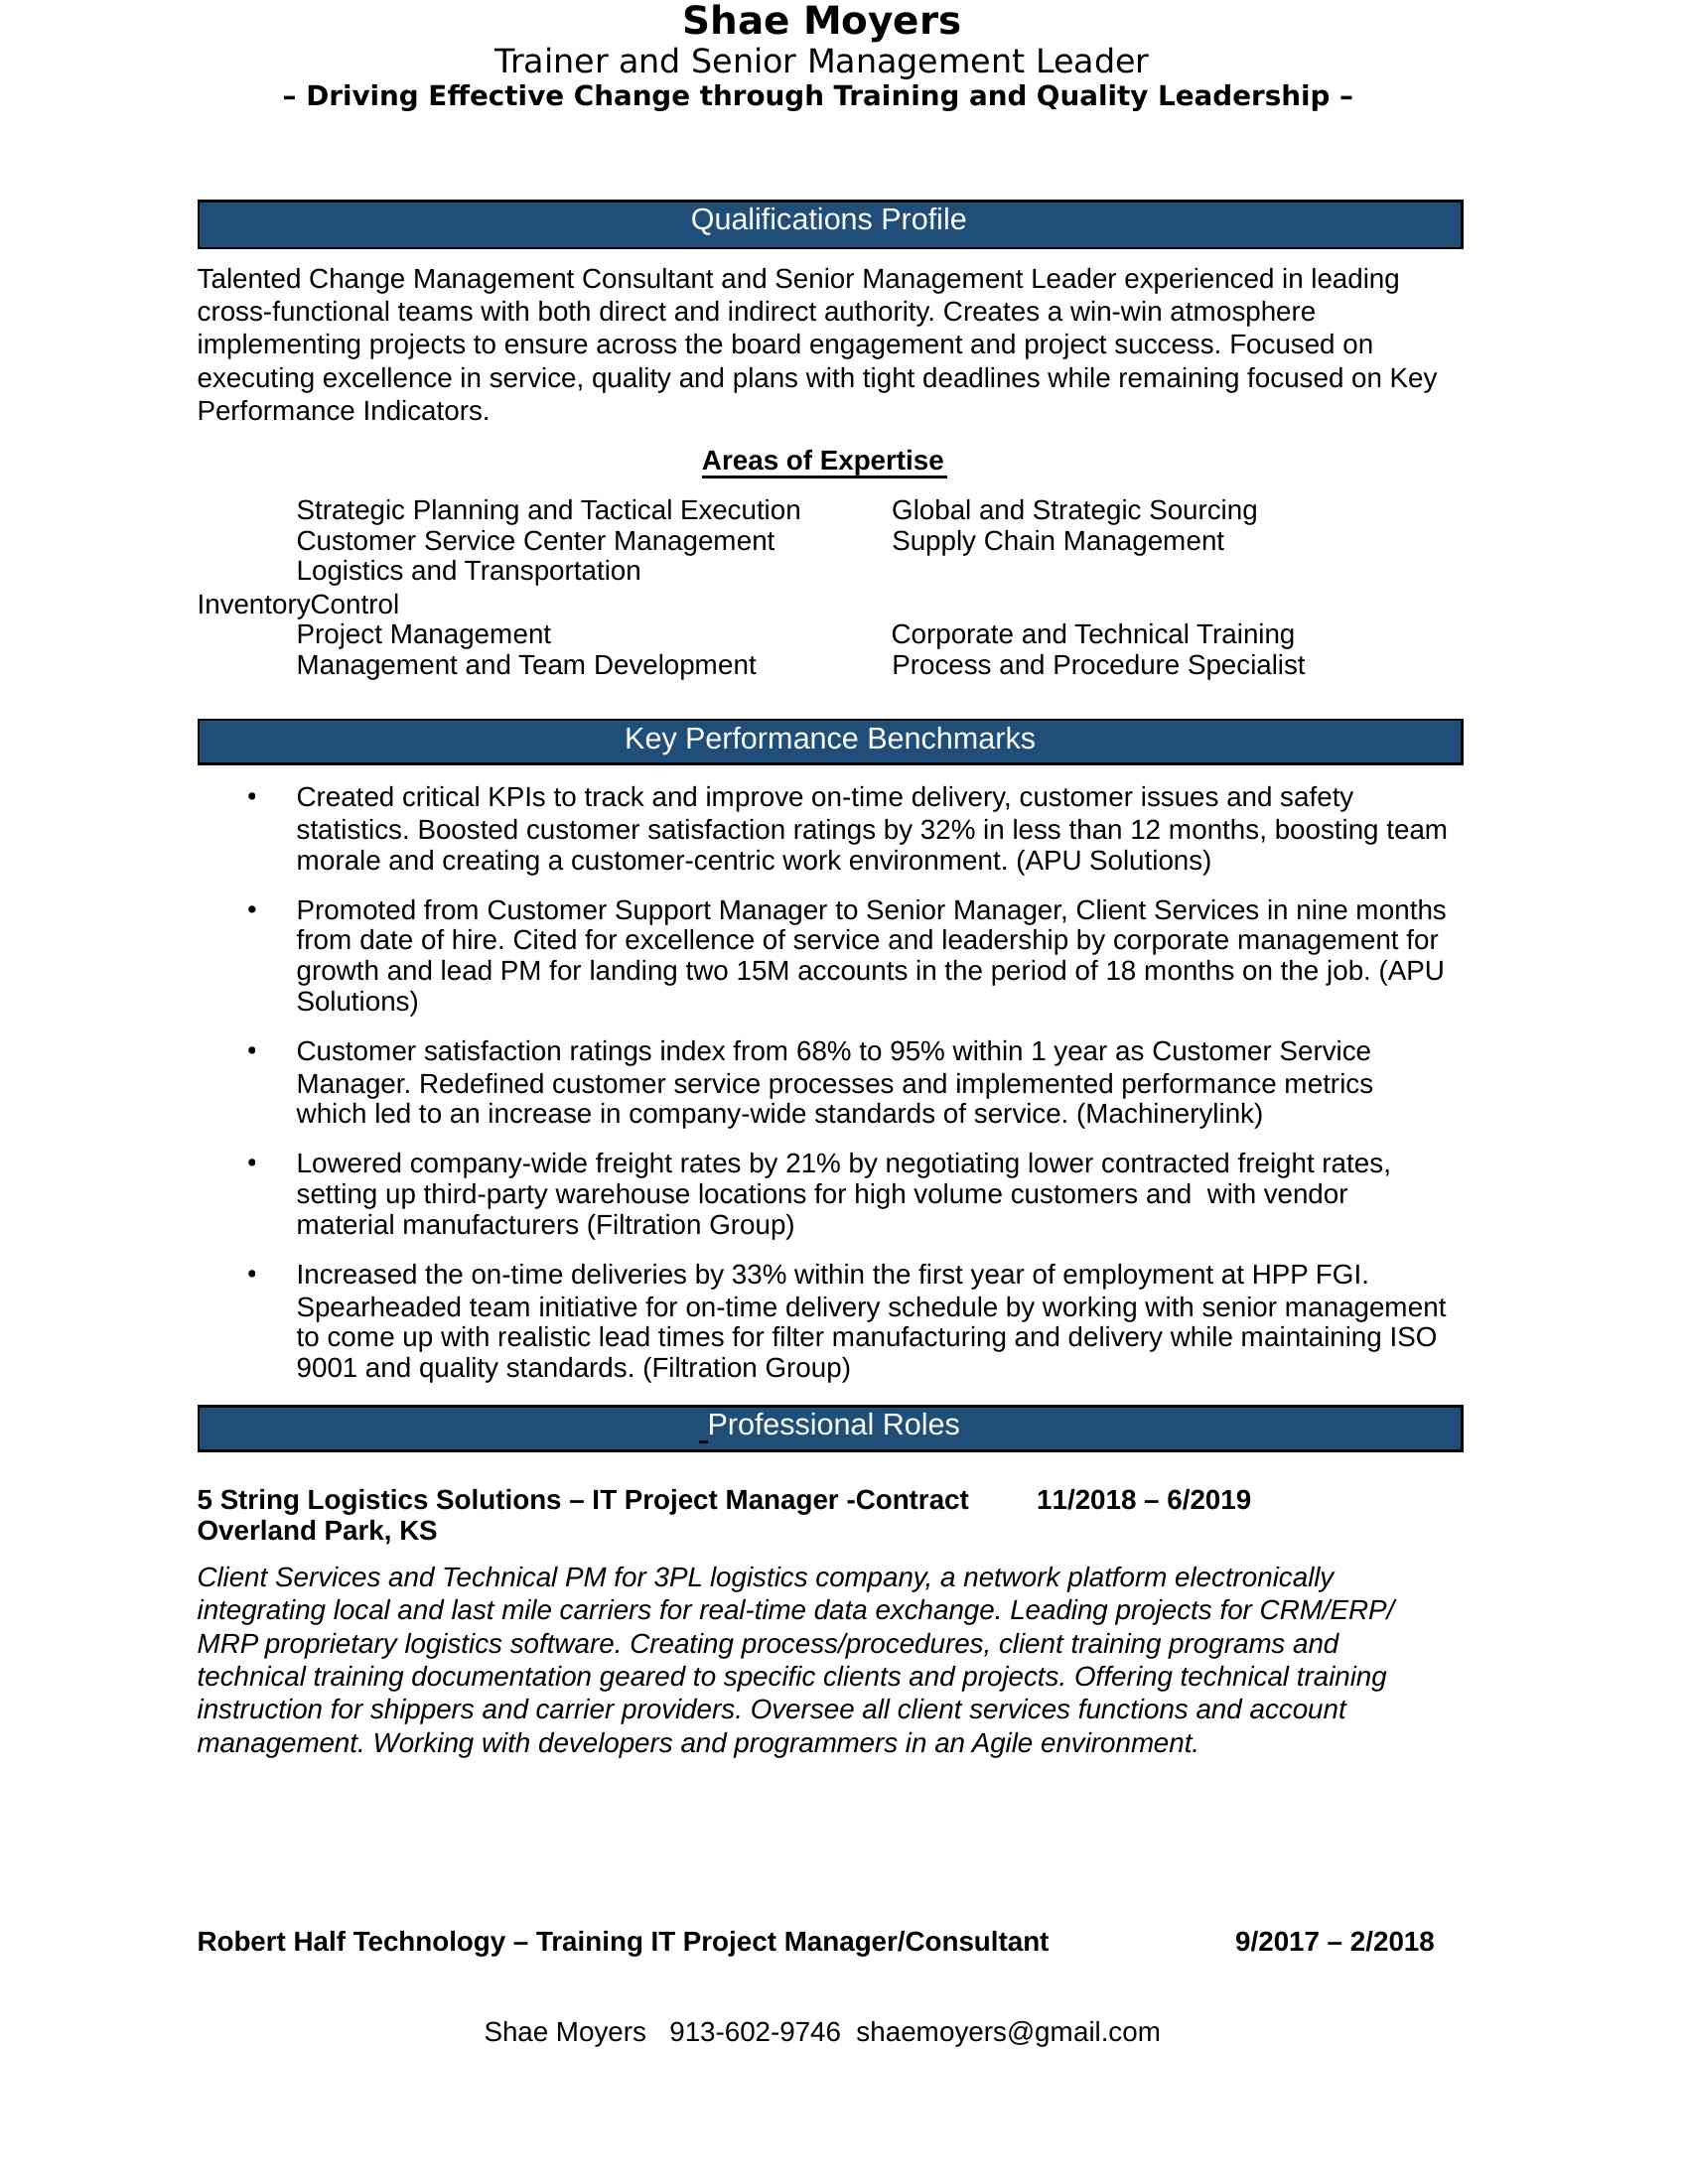 Qualifications Profile<BR>Talented Change Management Consultant and Senior Management Leader experienced in leading cross-functional teams with both direct and indirect authority. Creates a win-win atmosphere implementing projects to ensure across the board engagement and project success. Focused on executing excellence in service, quality and plans with tight deadlines while remaining focused on Key Performance Indicators. <BR>Areas of Expertise<BR>  Strategic Planning and Tactical Execution   Global and Strategic Sourcing<BR>Customer Service Center Management    Supply Chain Management<BR>Logistics and Transportation                InventoryControl                        <BR>Project Management                    Corporate and Technical Training<BR>  Management and Team Development    Process and Procedure Specialist<BR>Key Performance Benchmarks<BR>  Created critical KPIs to track and improve on-time delivery, customer issues and safety statistics. Boosted customer satisfaction ratings by 32% in less than 12 months, boosting team morale and creating a customer-centric work environment. (APU Solutions)<BR>  Promoted from Customer Support Manager to Senior Manager, Client Services in nine months from date of hire. Cited for excellence of service and leadership by corporate management for growth and lead PM for landing two 15M accounts in the period of 18 months on the job. (APU Solutions)<BR>  Customer satisfaction ratings index from 68% to 95% within 1 year as Customer Service Manager. Redefined customer service processes and implemented performance metrics which led to an increase in company-wide standards of service. (Machinerylink)<BR>  Lowered company-wide freight rates by 21% by negotiating lower contracted freight rates, setting up third-party warehouse locations for high volume customers and with vendor material manufacturers (Filtration Group)<BR>  Increased the on-time deliveries by 33% within the first year of employment at HPP FGI. Spearheaded team initiative for on-time delivery schedule by working with senior management to come up with realistic lead times for filter manufacturing and delivery while maintaining ISO 9001 and quality standards. (Filtration Group)<BR> Professional Roles<BR>5 String Logistics Solutions – IT Project Manager -Contract     11/2018 – 6/2019<BR>Overland Park, KS<BR>Client Services and Technical PM for 3PL logistics company, a network platform electronically integrating local and last mile carriers for real-time data exchange. Leading projects for CRM/ERP/MRP proprietary logistics software. Creating process/procedures, client training programs and technical training documentation geared to specific clients and projects. Offering technical training instruction for shippers and carrier providers. Oversee all client services functions and account management. Working with developers and programmers in an Agile environment. <BR>Robert Half Technology – Training IT Project Manager/Consultant       9/2017 – 2/2018<BR>Overland Park, KS<BR>Technical Training Consultant for contract agency. Overseeing a variety of projects for ERP/MRP proprietary software. Creating training programs and technical training documentation geared to specific clients and projects. Offering technical training instruction for Train the Trainer and actual material delivery to client’s employees.<BR>  Change Management : Develop process and standardized procedures for companies during technological and cultural business changes. Oversee/lead change management initiatives to be implemented company or division wide. Work with internal partners, third party vendors, executive leadership teams.<BR>  Project One – Worked with a tax preparation software company to redesign their new hire training initiatives and also write technical documentation for the latest update on their software for training delivery. Trained in house staff to be better trainers. Led classroom facilitation for new hire call center employees.<BR>  Project Two – Worked with local manufacturer to design a new account/customer service role for their out of state plants. This new role comprised of order management, logistics, contract negotiations and production planning. Had to learn the new position so I could effectively write the “Go To” guides teaching aids and work with outside consultants to deliver proprietary ERP software being rolled out<BR>APU Solutions, Senior Manager, Client Services<BR>Overland Park, KS – Role Eliminated             3/2015 to 5/2017<BR>Manage a group of 25 account managers handling account management, training, technical support and supply chain management in a call center environment for an automotive software company. Heavily involved with the Agile software development and building of the of all the training and e-based learning materials for this company. Promoted to Senior Management and sited for excellence for both personal performance and team performance.   Accolades: Promoted from Customer Support Manager to Senior Manager, Client Services in 9 months. Cited for excellence of service and leadership by corporate management for growth and lead PM for landing two 15M accounts in the period of 18 months on the job.<BR>  Team/Department Development: Grew team from 4 account managers to 25 account managers in one year. Building service structure, policy and procedures and standard operating procedures. <BR>  Resource: Provided guidance/suggestions/recommendations on add-on features, reporting tool development, training documentation and online/web based learning tools. <BR>  Change Management : Develop process and standardized procedures for companies during technological and cultural business changes. Oversee/lead change management initiatives to be implemented company or division wide. Work with internal partners, third party vendors, executive leadership. Manage large scale implementations and new software rollouts for automotive insurance companies, auto repair facilities and automotive parts suppliers for the APU Network.<BR>Trainer and Course Development: Designed all software training documentation and ebased learning tools for clients and internal use for employee training. Onsite classroom and web-based training delivery to audiences of 10-30 participants for automotive insurance companies and automotive suppliers. Trained all technical support staff. Working with developers and programmers in an Agile environment. <BR>  Cross Functional Expertise: Administrative duties included interviewing, hiring, firing, performance reviews, developing, implementing and maintaining KPIs for two teams that manage accounts ranging from $150k to more than $75M in annual orders for both US and Canadian clients.<BR>  Alignment with Senior Leadership: Partnered closely with senior management on training development, software development and implementation. In charge of change management projects.<BR>The Ashe Group LLC, Senior Training Consultant/ IT Project Manager, Shawnee, KS              1/2012 to 6/2016<BR>Training and Project Management Consultant consulting for state government agencies and private companies on a variety of technical and soft-skill training projects. Working with developers and programmers in an Agile environment for proprietary ERP and MRP software development.. <BR>  Change Management : Develop process and standardized procedures for companies during technological and cultural business changes. Oversee/lead change management initiatives to be implemented company or division wide. Work with internal partners, third party vendors, executive leadership teams.<BR>  Accomplished Trainer: Lead trainer for groups of 10-45 participants in multi-week sessions in classroom and corporate environments. Scored in the top 98% percentile in student evaluations for excellence in delivery, learning comprehension and job success coaching. Cited for excellence by MO state labor leadership for youth program management excellence in 2013 and 2014.<BR>  Course Development: Developed and delivered proprietary training materials and aids for classroom and online seminars, including Web X based training. Manuals still in use today.<BR>  Resource: Provided guidance/suggestions/recommendations on add-on features, reporting tool development, training documentation and online/web based learning tools. <BR>Multivac, SAP CRM Administrator Contractor, Kansas City, MO (Contract)  5/2012 – 11/2012<BR>Worked with cross-functional teams and leadership to develop new SAP CRM, Business Objects reports and training modules for XX customer service representatives.<BR>  CRM Analysis: Designed and implemented customized reporting templates and created reports for sales department from CRM database.<BR>  Database Administration: Performed routine audits to ensure database integrity and all information entered into CRM meets company data quality standards.<BR>TSymmetry, Lead Change Management & SAP Training Consultant (Contract)<BR>Washington, DC / Kansas City, MO 1/2012 – 5/2012<BR>Implemented new training material and managed change management process for FMMI software implementation and course delivery for federal and state agencies. Working with developers and programmers in an Agile environment. <BR>  SAP Trainer and Course Development: Lead SAP Trainer and Project Liaison for USDA Federal Government SAP Contract implementation. Created training materials and training aids for Train the Trainer FMMI ERP training delivery for classroom and online seminars and Web X based training.<BR>  Skilled Facilitator: Onsite classroom and web-based training delivery to audiences of 10-30 participants for specific government agency employees on FMMI (Federal web based version of SAP used for all federal agencies).<BR>  Change Management : Develop process and standardized procedures for companies during technological and cultural business changes. Oversee/lead change management initiatives to be implemented company or division wide. Work with internal partners, third party vendors, executive leadership teams.<BR>  Cross-Agency Expertise: Worked with multiple agency directors and leadership to coordinate all aspects of training and material deliveries to all involved USDA agencies and staff.<BR>  Accolades: Cited for training excellence and delivery scoring in the 96% percentile for project performance kpi metrics based on student evaluations. Ranked #2 of 20 trainers nationally for exceptional performance in delivery and student satisfaction.<BR>Dairy Farmers of America, Manager, Consumer Brands Customer Service <BR>Kansas City, MO – Laid Off  2010 to 2011<BR>Managed fifteen account representatives who supported ordering and delivery of name-brand and private label dairy products to large-scale grocery and big box retail stores. <BR>  Team Lead: Responsible for hiring, firing, performance reviews, and maintaining KPIs for a team that managed accounts ranging from $150k to more than $75M in annual orders. Primary lead for CSD largest account WalMart. Handle all aspects of account/order/change management initiatives for this customer.<BR>  SAP Trainer and Change Management: Selected as the sole SAP Trainer by the executive leadership team for corporate-wide cross-functional change management and training initiative/implementation for SAP software conversion. Included moving to a single company-wide intranet sales dashboard location.<BR>  Change Management : Develop process and standardized procedures for companies during technological and cultural business changes. Oversee/lead change management initiatives to be implemented company or division wide. Work with internal partners, third party vendors, executive leadership teams.<BR>  Alignment with Senior Leadership: Worked closely with senior management on training development and change management projects.<BR>  Inventory Management: Designed custom Business Object Reports and Business Intelligence reports for recording multiple division and department metrics, multiple out of state warehouse locations. <BR>  Pricing and Invoicing Review: Managed cross-functional staff for customer price adjustments, supervised contract review, input and order entry of sales orders by customer service staff. Review and audit of all invoicing and resolution of billing issues for all commercial customer accounts.<BR>Machinerylink, Manager, Planning and Customer Service, Kansas City, MO  2007 to 2009<BR>Planning and lead Customer Service Manager for agricultural equipment leasing company until company downsizing. Managed team of ten customer service reps and all aspects of service. <BR>  Fleet Management: Planning manager for combine fleet movement, inventory allocation and transportation of combines both nationally and internationally in Canada and Mexico.<BR>  Inventory and Logistics: Audited all data entries and reporting showing step-by-step accounting of combine fleet movement and accounting of all inventory, transactions and client activity of combine fleet. Monitoring and audited data submissions in order to maintain quality standards of data. <BR>  Data Analysis: Reporting and analysis of sales forecasting and needs analysis for operations, sales and executive leadership. <BR>  Budget Responsibility: Managed operations budget and guidelines pertaining to shipping and transportation overhead.<BR>  ERP Leadership: Primary contributor and project leader for the building, programming, testing and implementation of a proprietary sales forecasting/ scheduling tool and proprietary ERP system to enhance planning, route optimization and route specialization for combine fleet.<BR>Filtration Group - Aurora, IL, Customer Service Manager   2004 to 2006<BR>Customer Service Manager for pharmaceutical filter production facility. Managed team of ten customer service reps and all aspects of service. <BR>  Account Management: Processed and approved account credits, re-bills and accounting adjustments. <BR>  ISO Expertise: ISO 9001 auditor, documentation specialist and trainer.<BR>  Production Planning: Production planner and forecasting coordinator for plant production and building schedule.<BR>  Inventory Management and Logistics: Responsible for in-house stock, 3rd-party warehouse locations and off-site customer inventory programs. Coordinated inbound/outbound freight shipments.<BR>References<BR>Available by Request<BR>Education<BR>Bachelors of Science in Business Administration, Trinity College 2002<BR>Shae Moyers<BR>Trainer and Senior Management Leader<BR>– Driving Effective Change through Training and Quality Leadership – <BR>Shae Moyers<BR>Trainer and Senior Management Leader<BR>Page 5<BR>Shae Moyers  (XXX) XXX-XXXX XXXX@XXXX.XXX<BR>Shae Moyers  (XXX) XXX-XXXX XXXX@XXXX.XXX